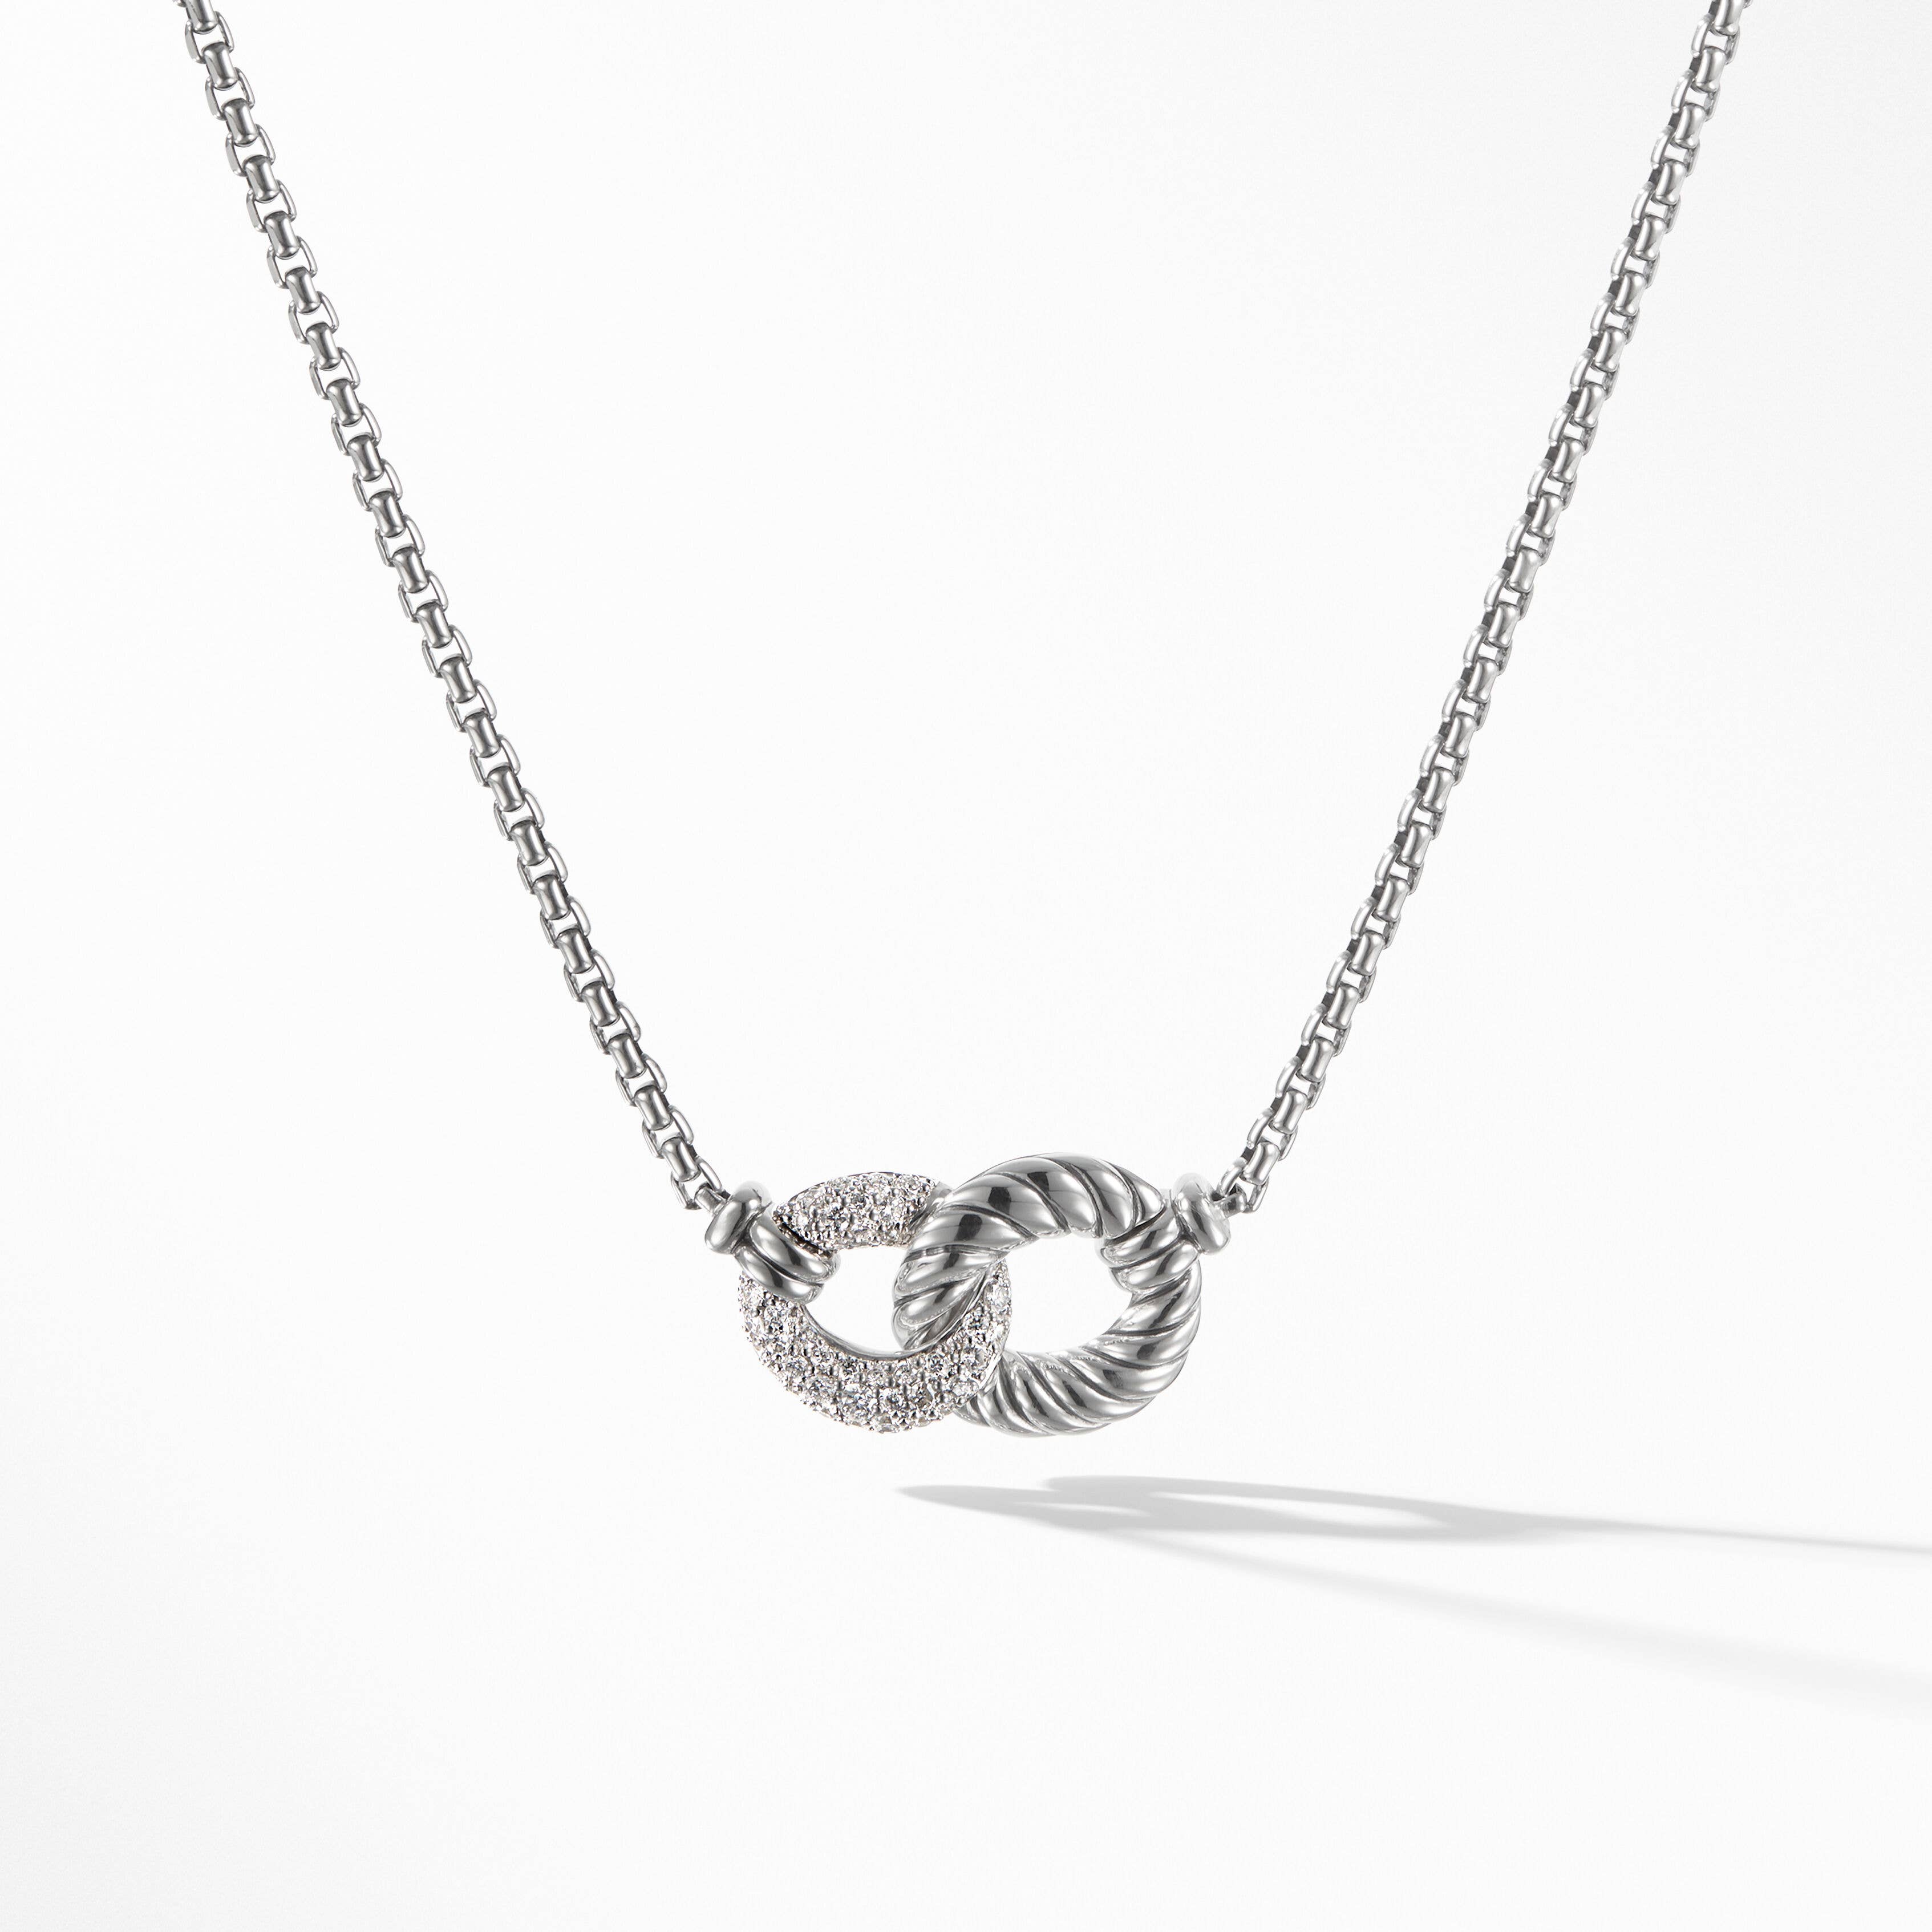 Belmont® Curb Link Necklace in Sterling Silver with Pavé Diamonds